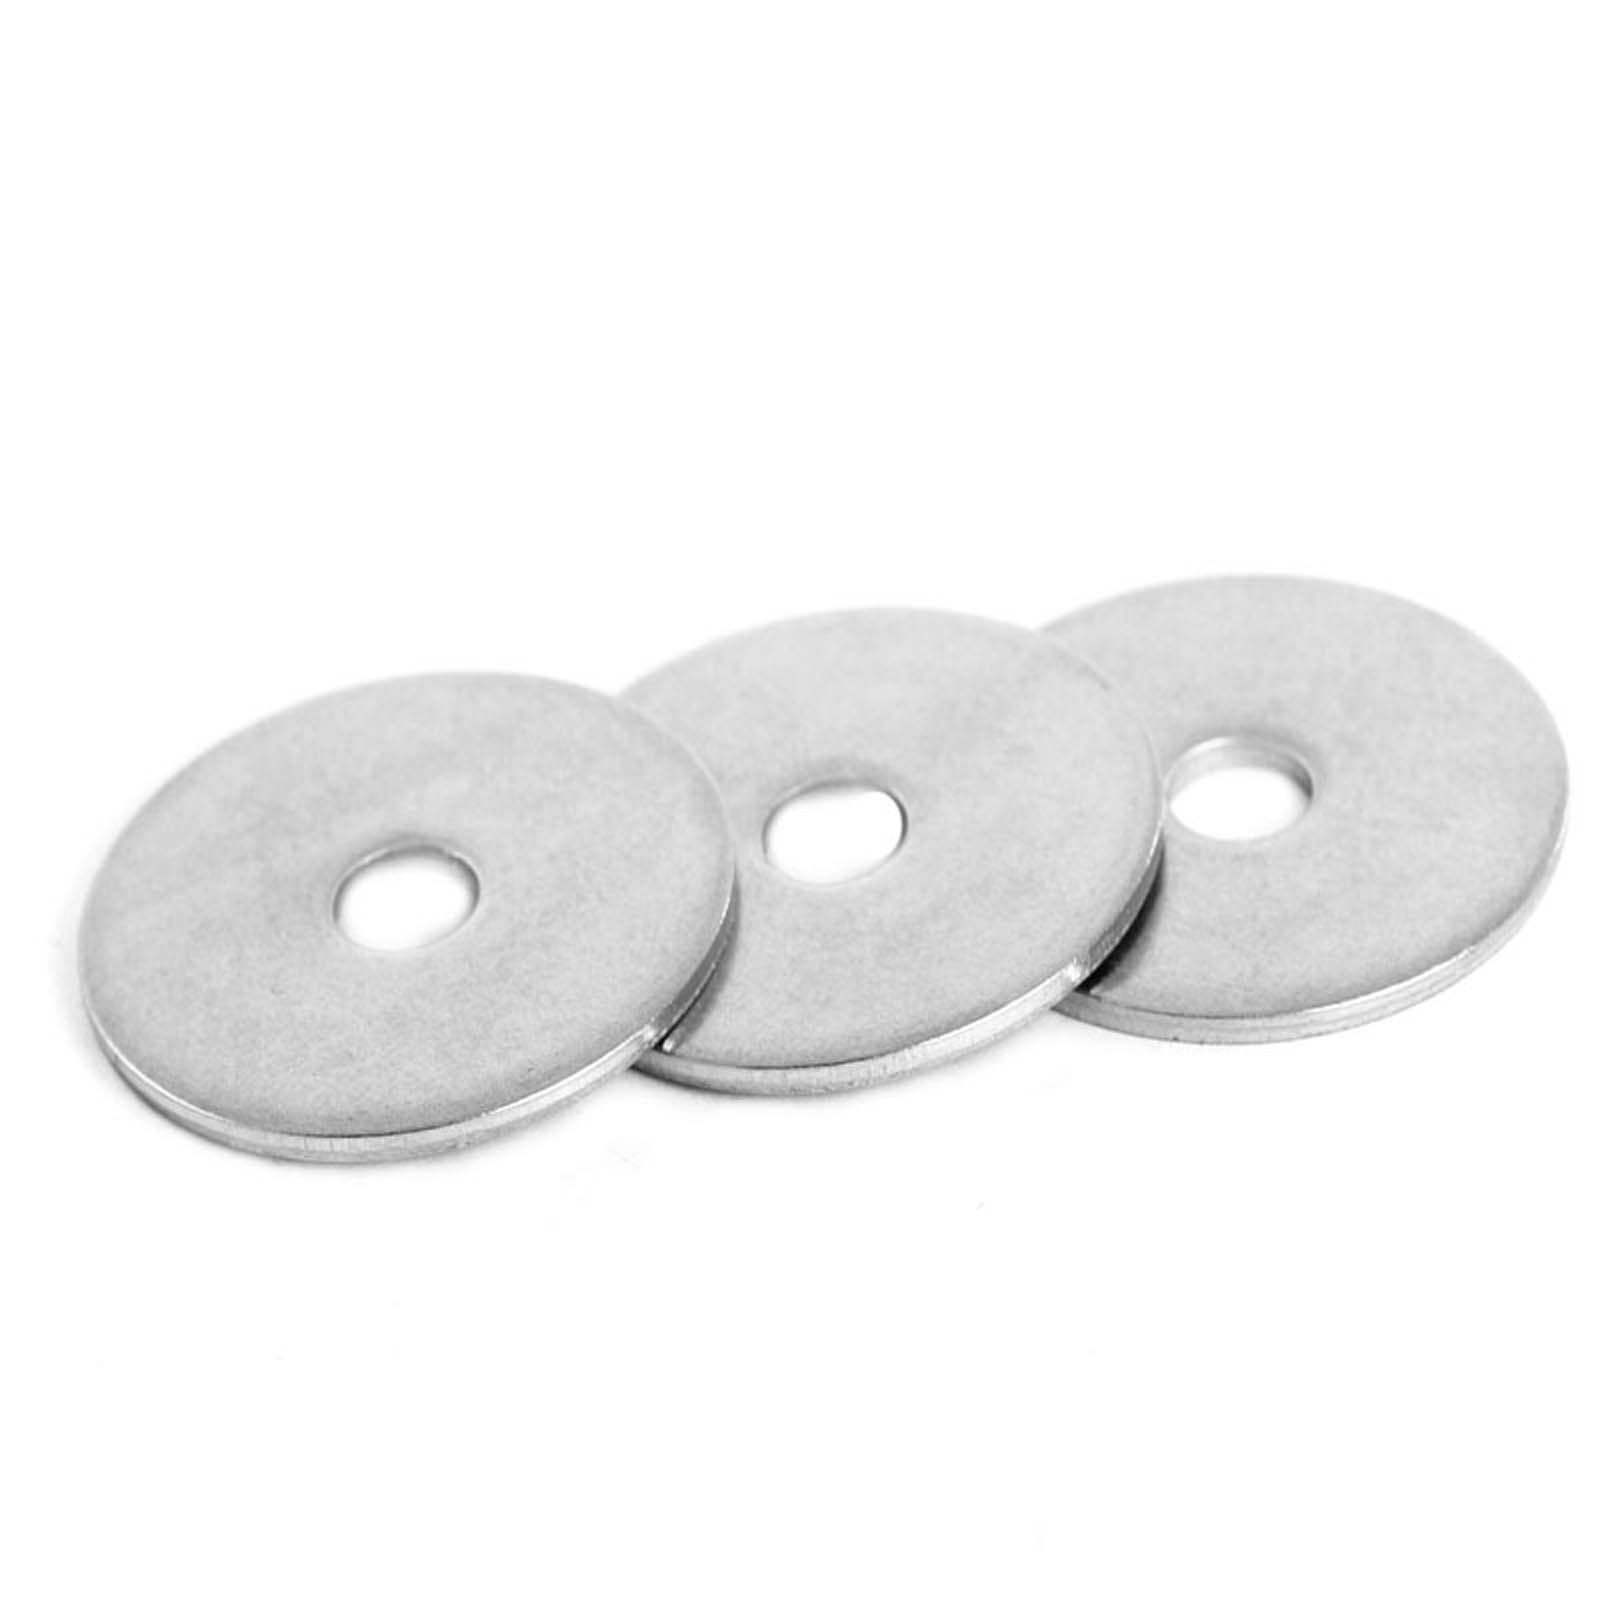 New WHITES Washer Penny Zinc Plated - 5 x 20mm (50 Pack) #HWW5X20